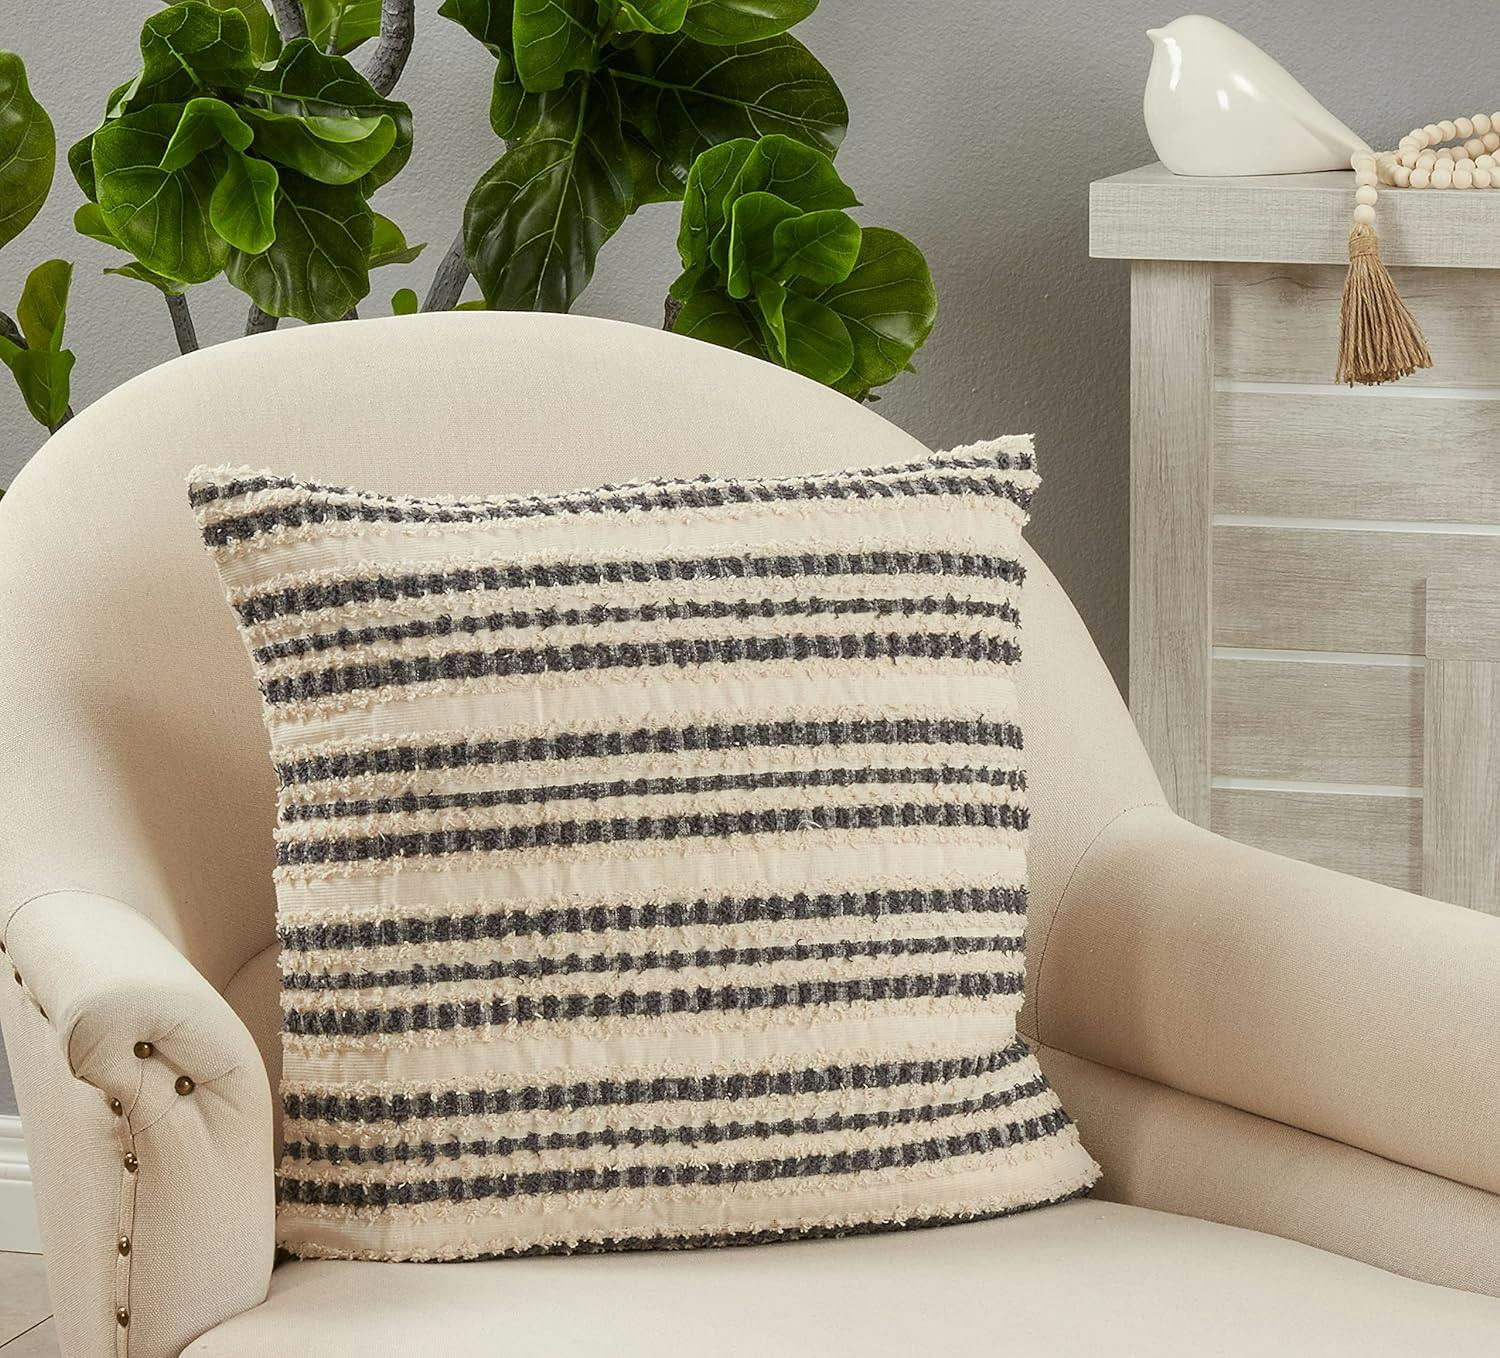 Classic Black and White Striped Cotton Throw Pillow Cover